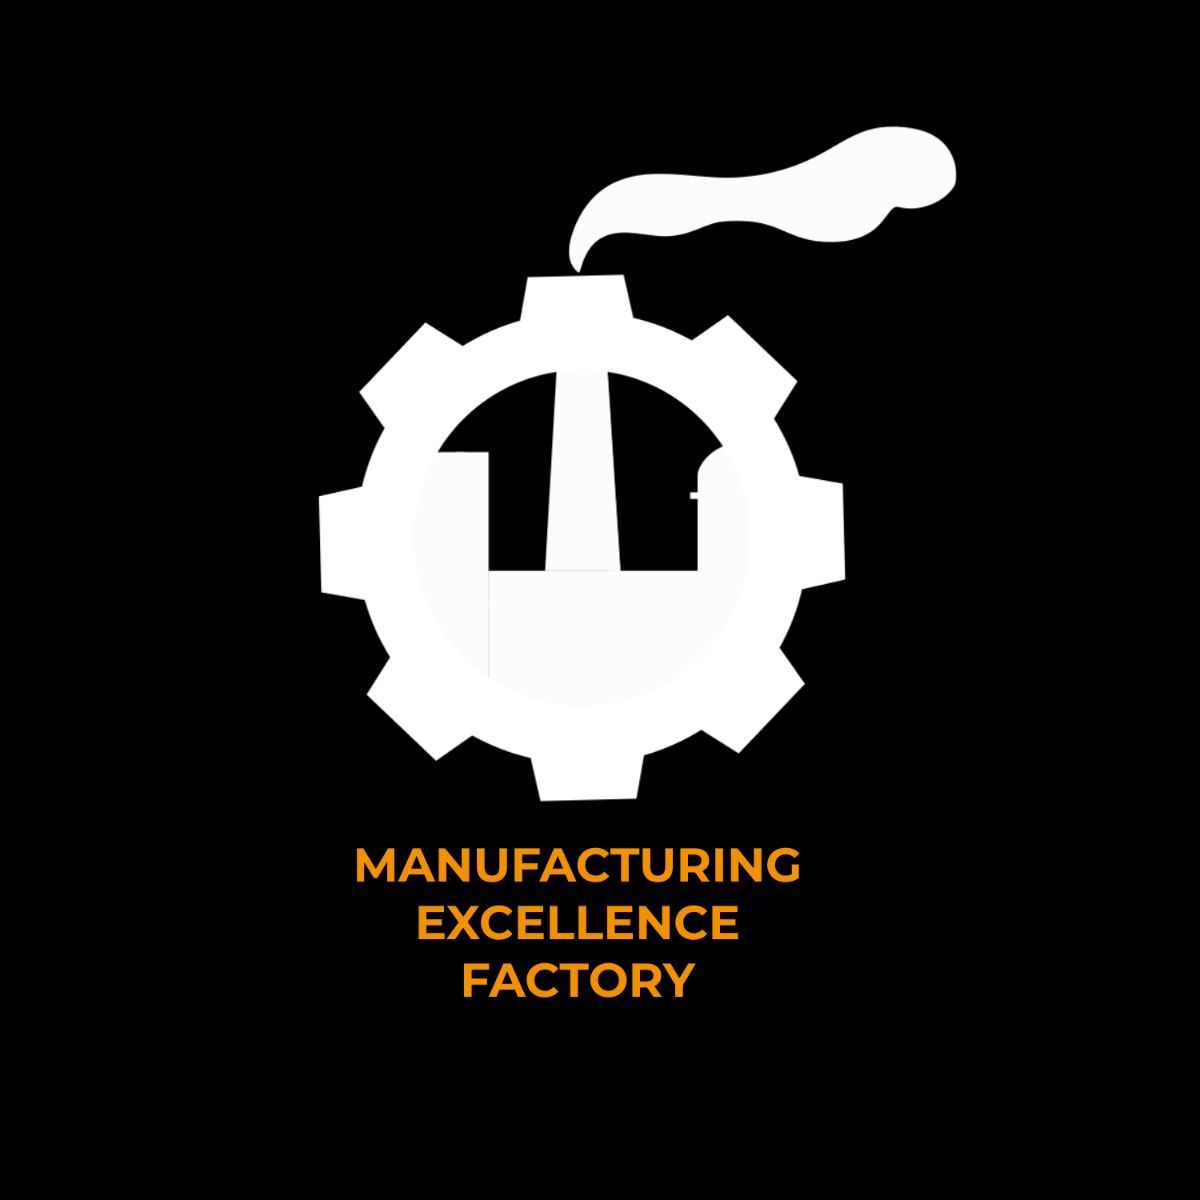 Manufacturing Excellence Factory Logo Template